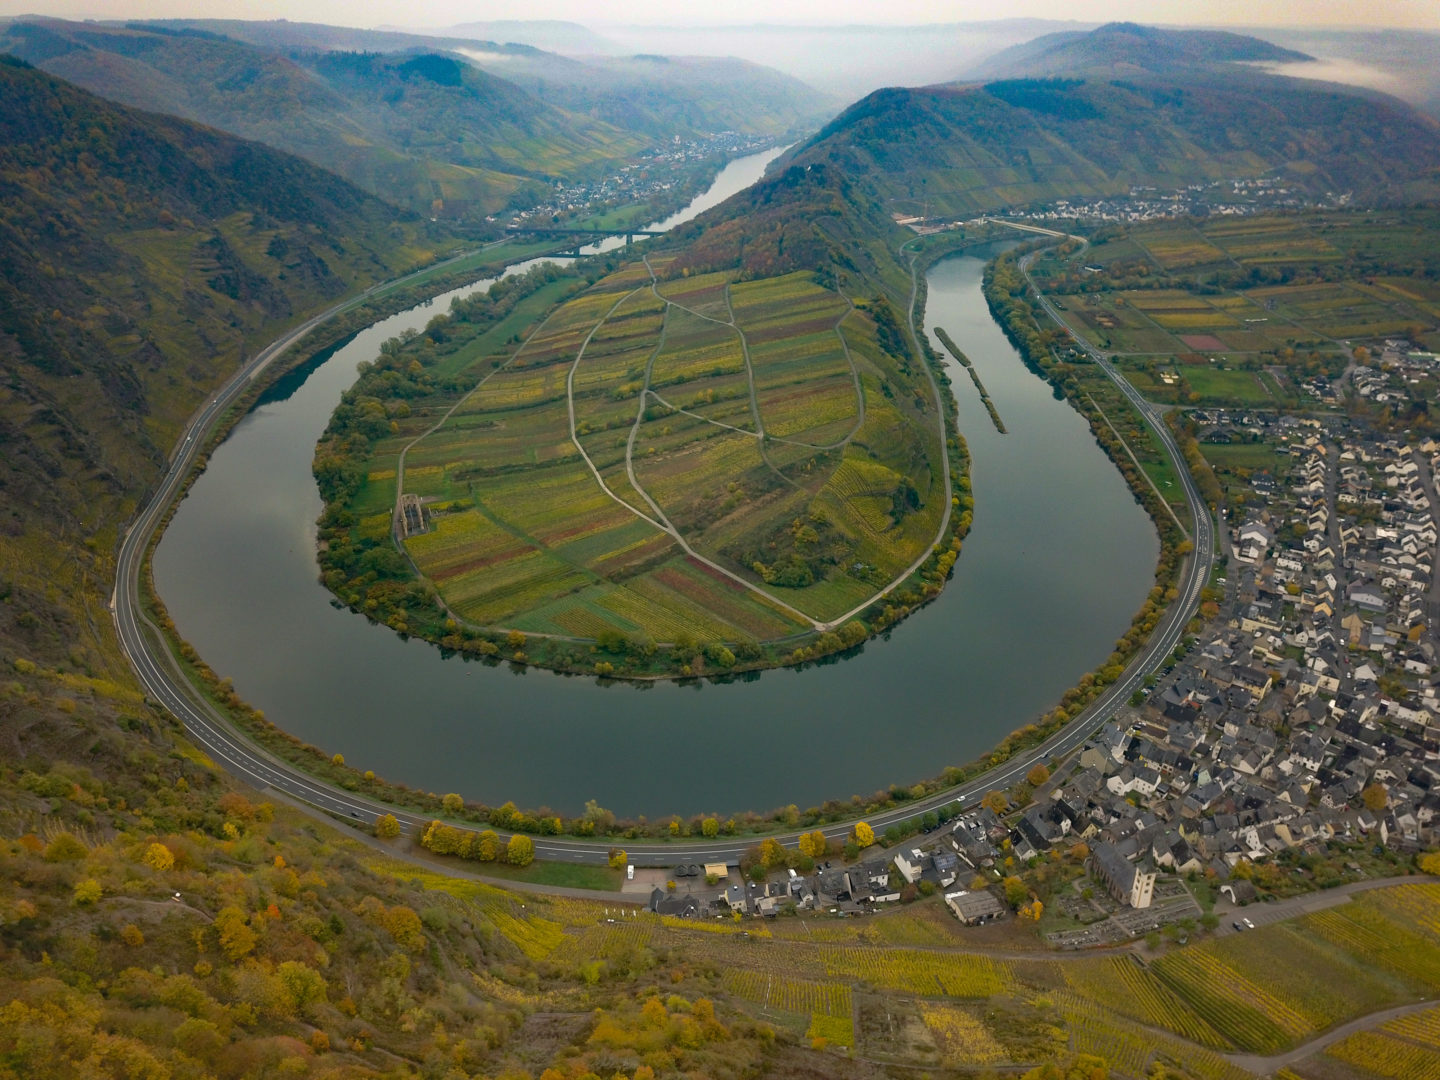 The river Mosel makes an impressive hairpin turn near the town of Bremm.